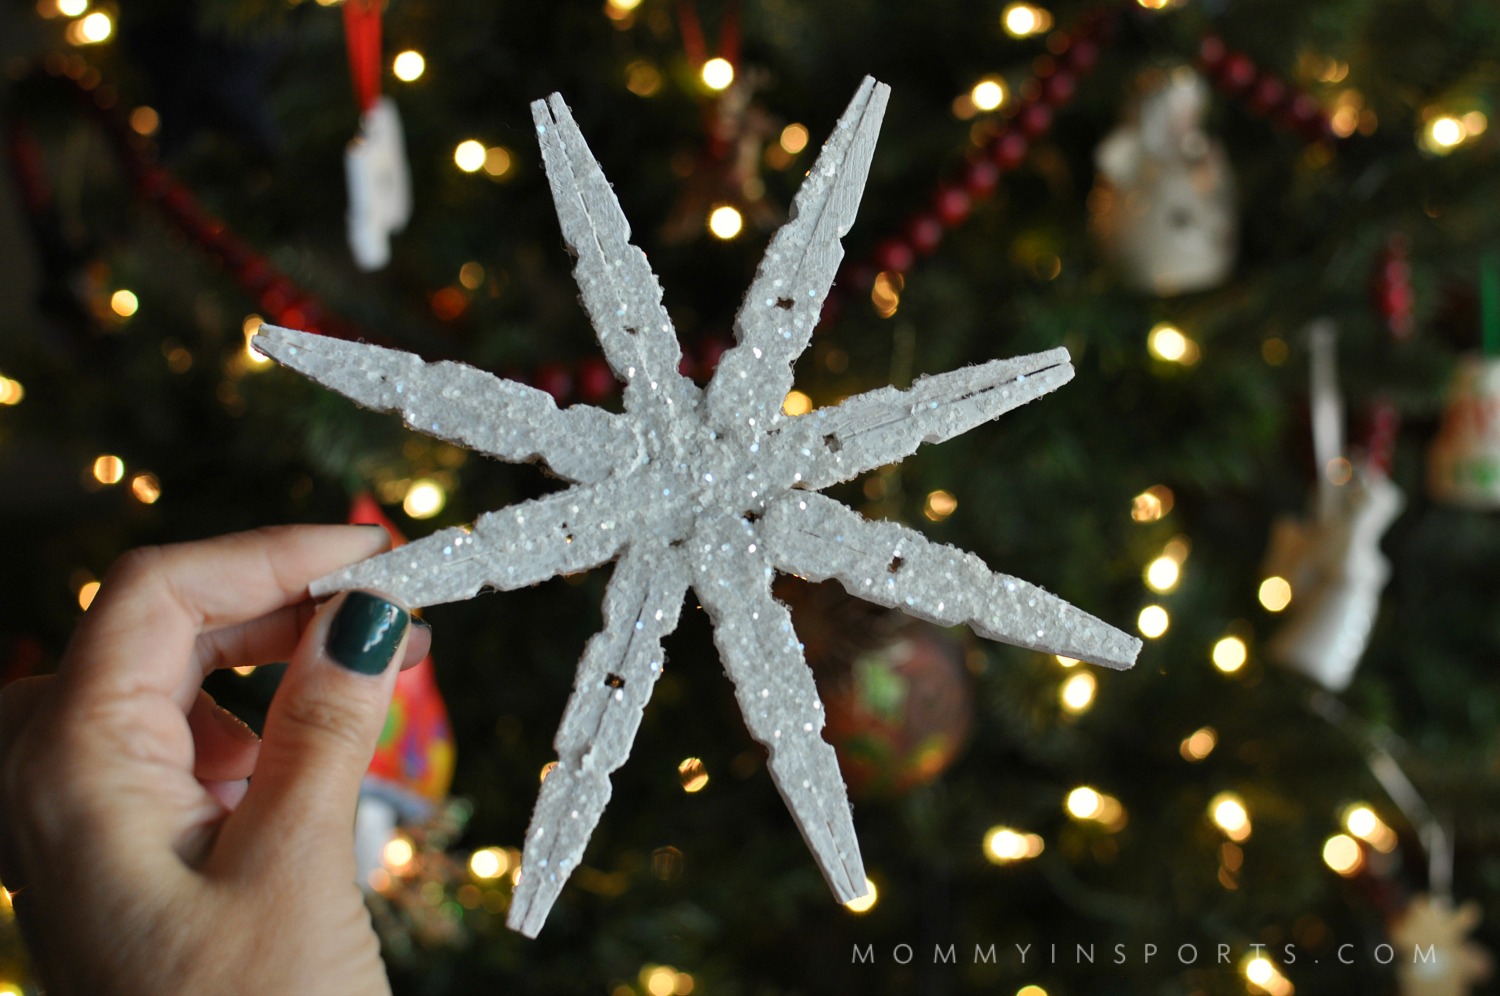 Looking for some cute holiday decor ideas that won't break the bank? Try one of these 4 Easy DIY Holiday Projects! Your home will be merry & bright!